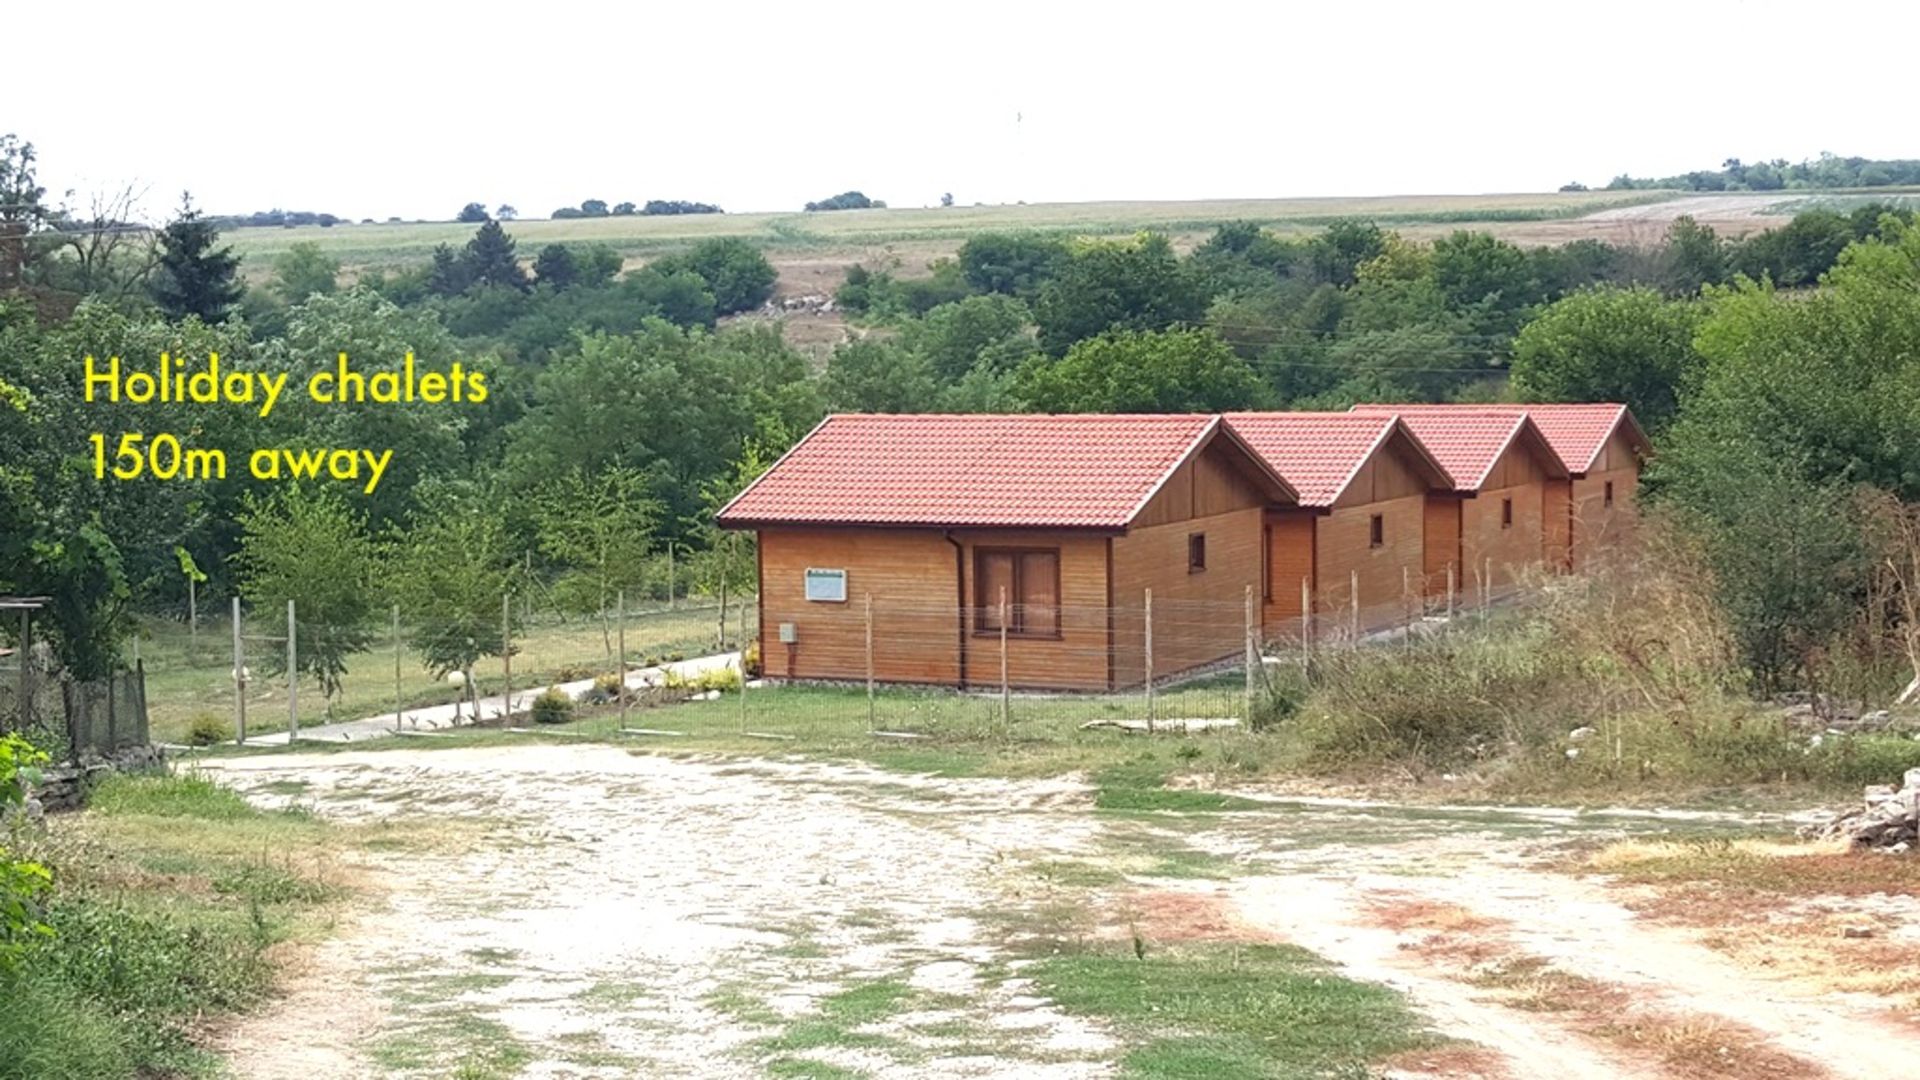 Sunny Bulgarian cottage 30 miles from beaches   Here is a great opportunity to snap up a well- - Image 17 of 26